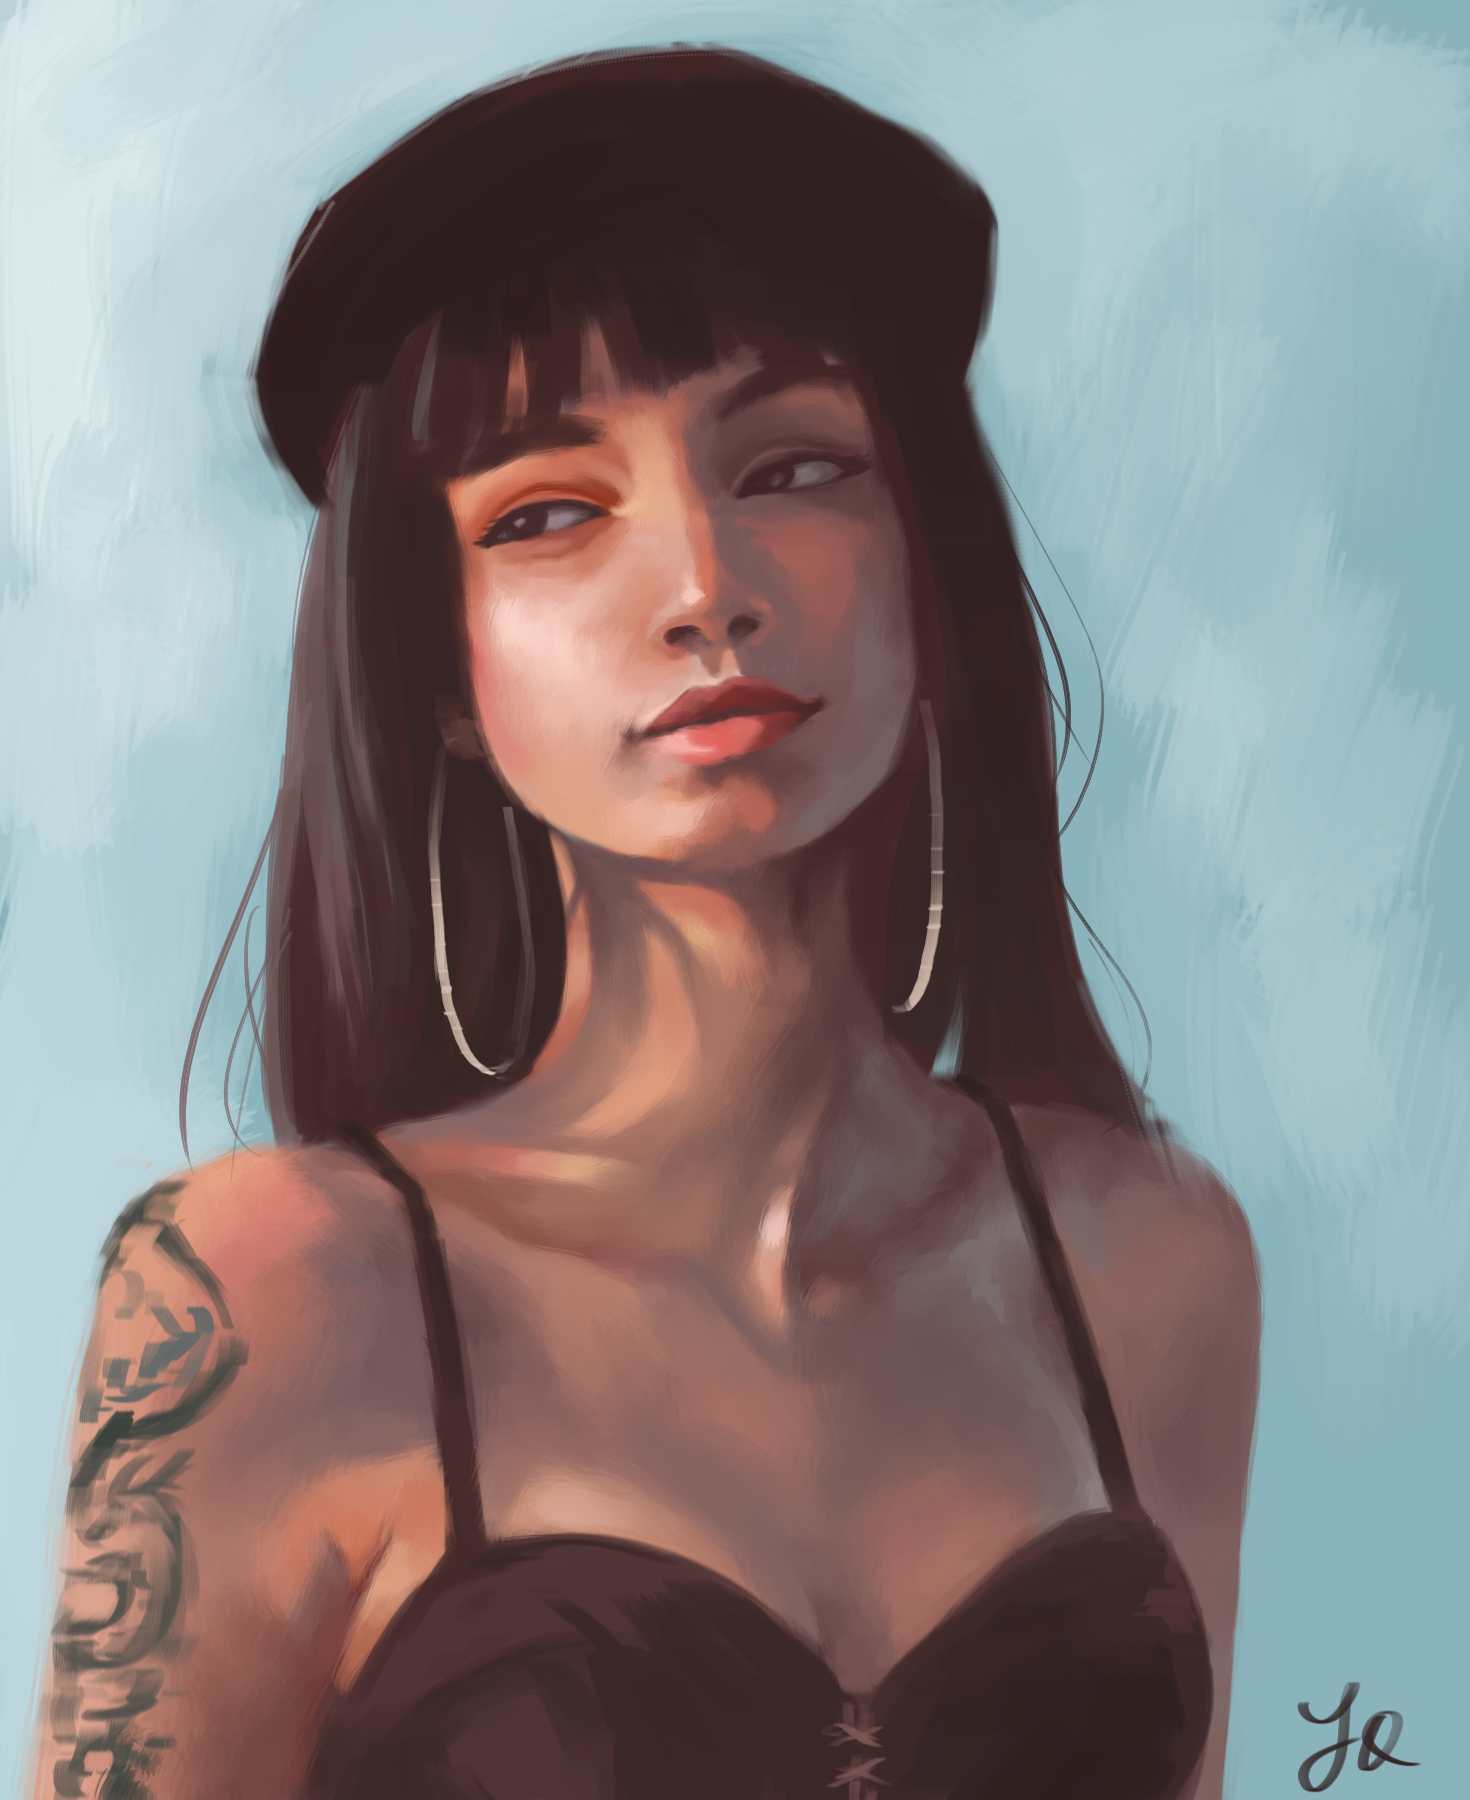 A digital painting photo study of a woman with long, straight black hair, wearing a black beret and corset, facing the camera with chin tilted slightly upwards and looking out of the corner of her eyes to her right.